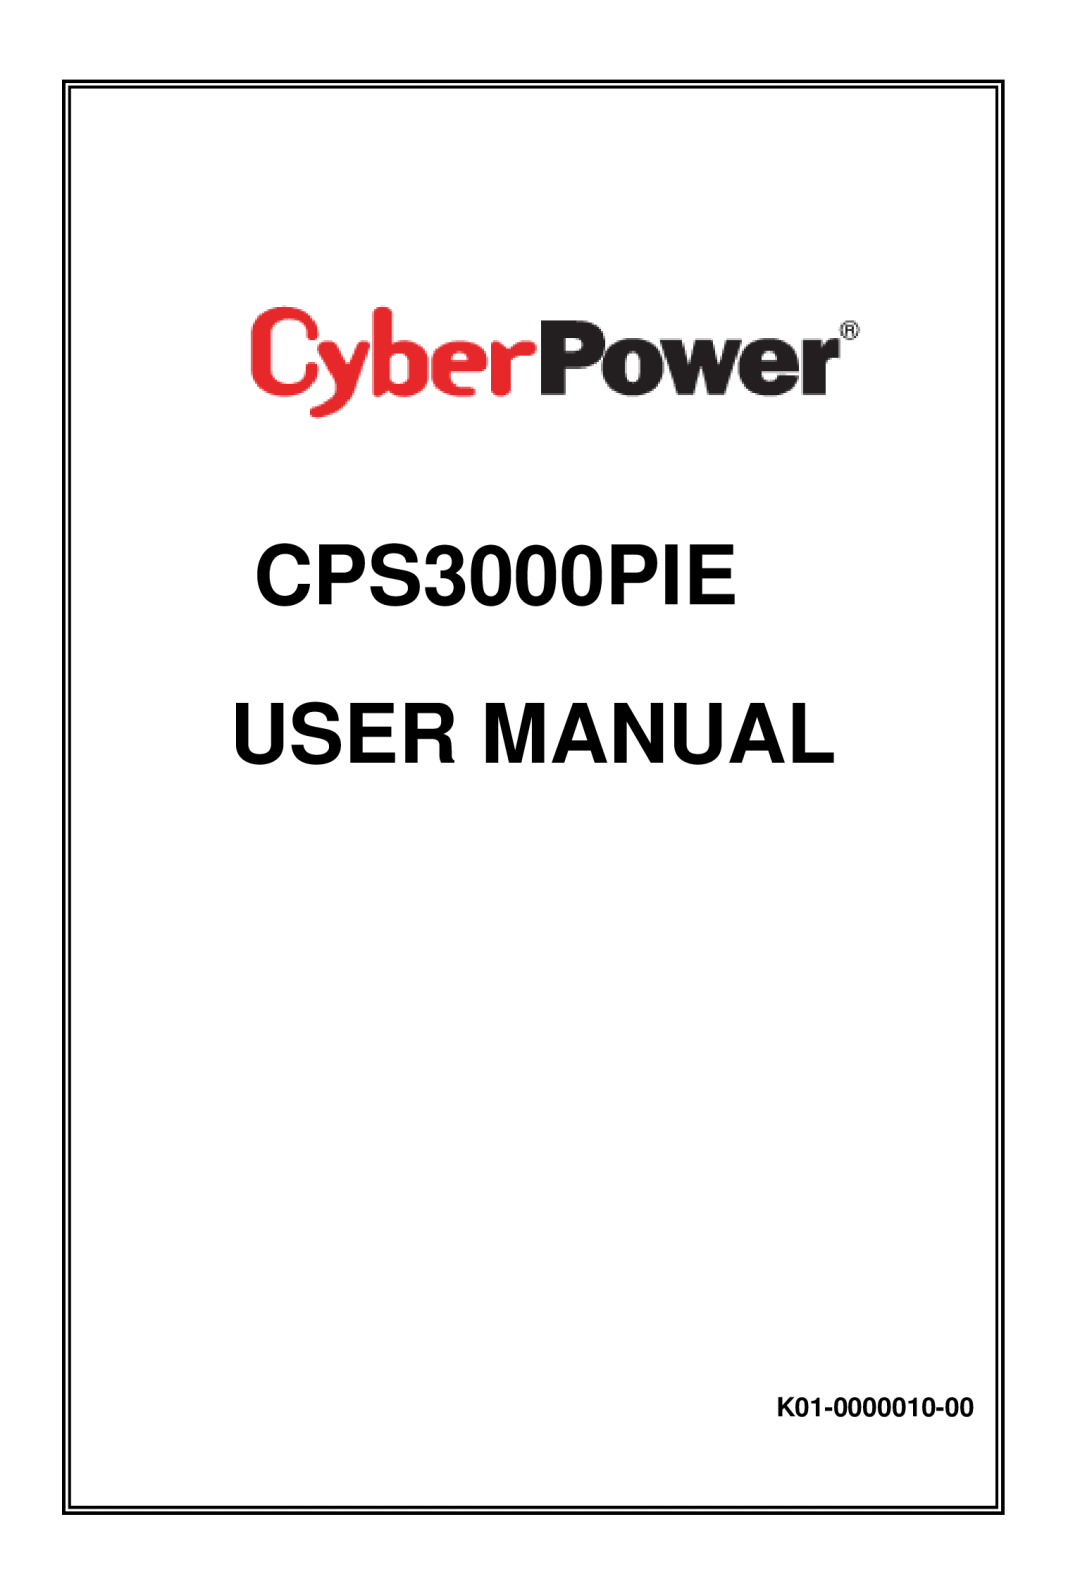 CyberPower Systems user manual CPS3000PIE USER MANUAL, K01-0000010-00 